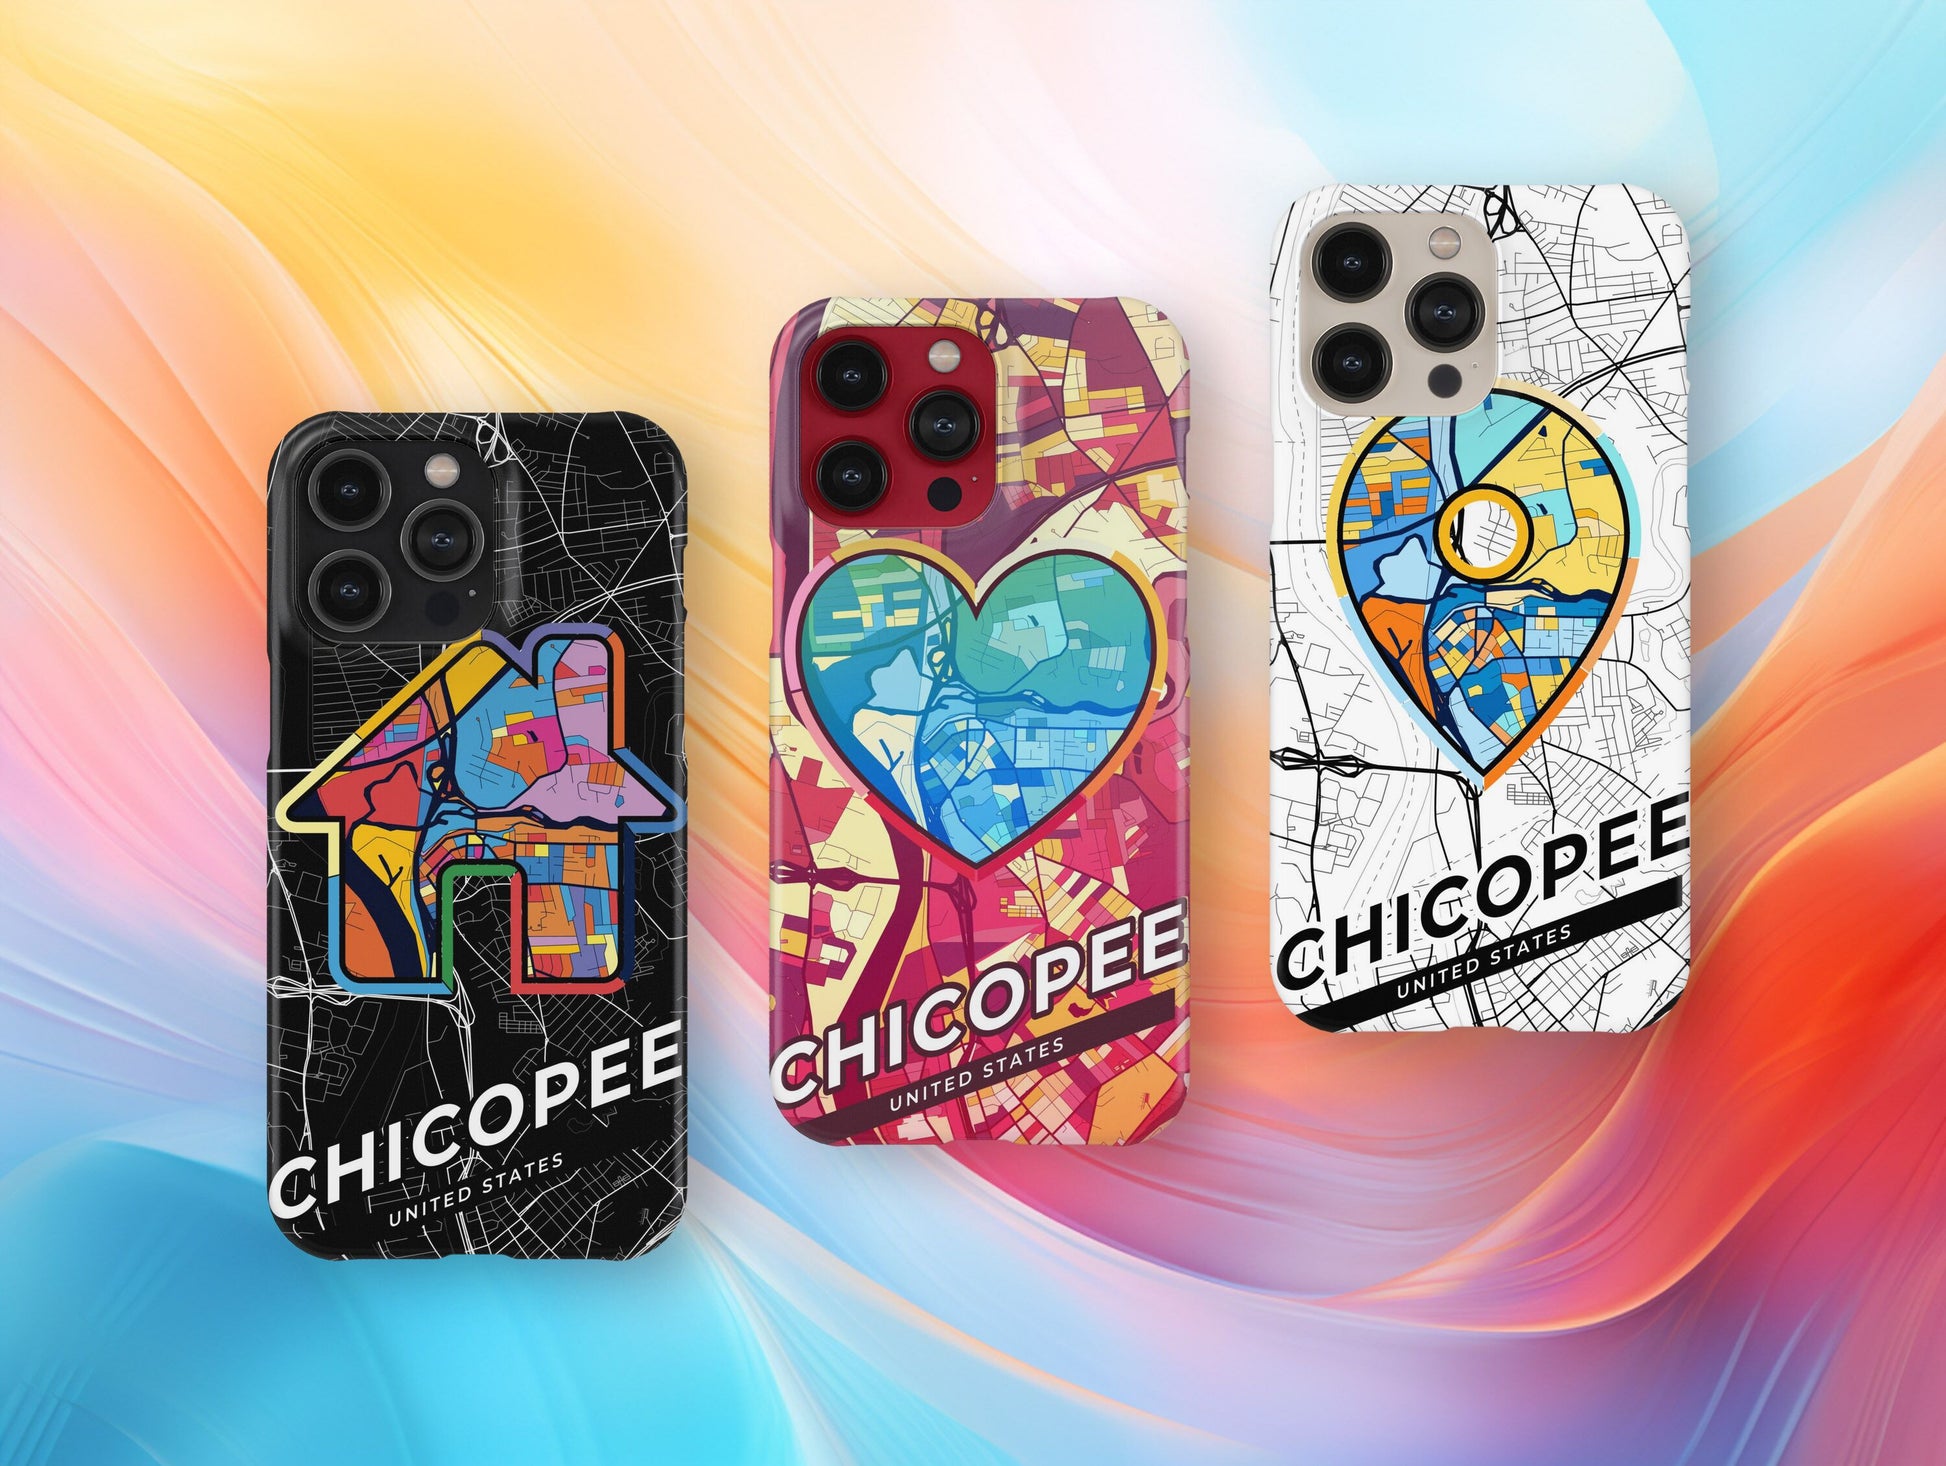 Chicopee Massachusetts slim phone case with colorful icon. Birthday, wedding or housewarming gift. Couple match cases.